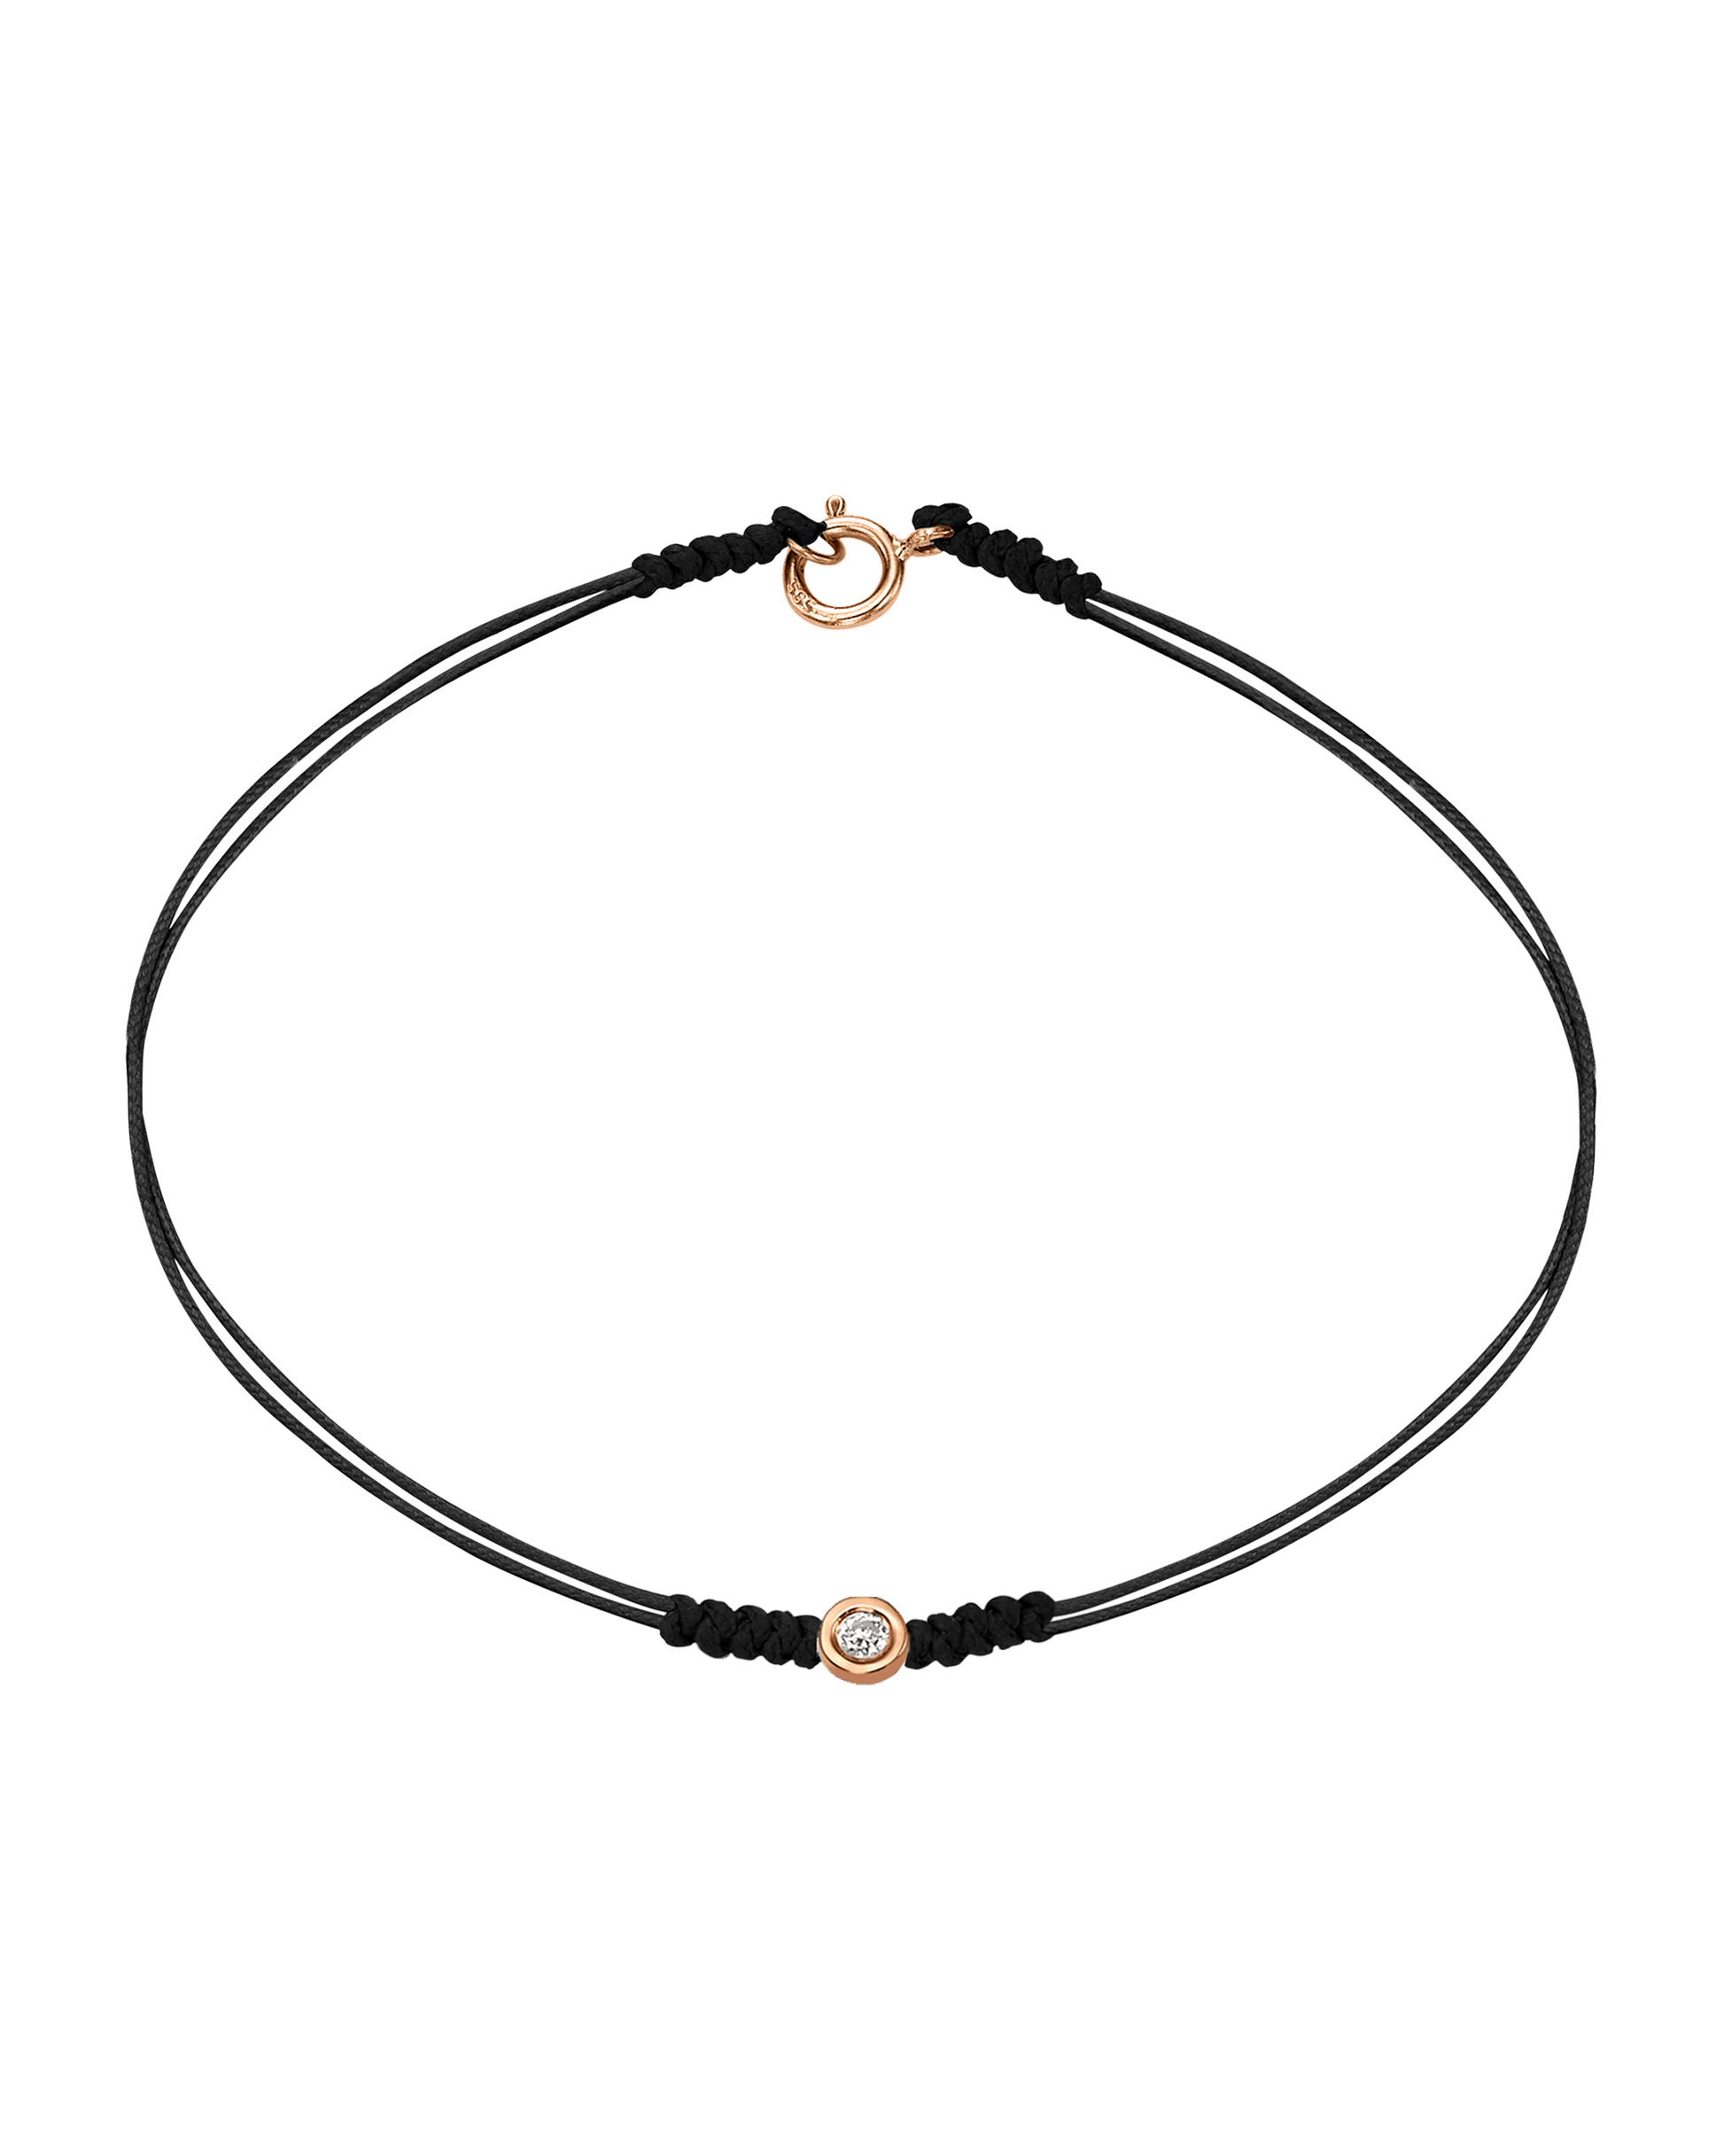 The Classic String of Love with clasp - 14K Rose Gold Bracelets 14K Solid Gold Black Small: 0.03ct Small - 6 Inches (15.5cm)